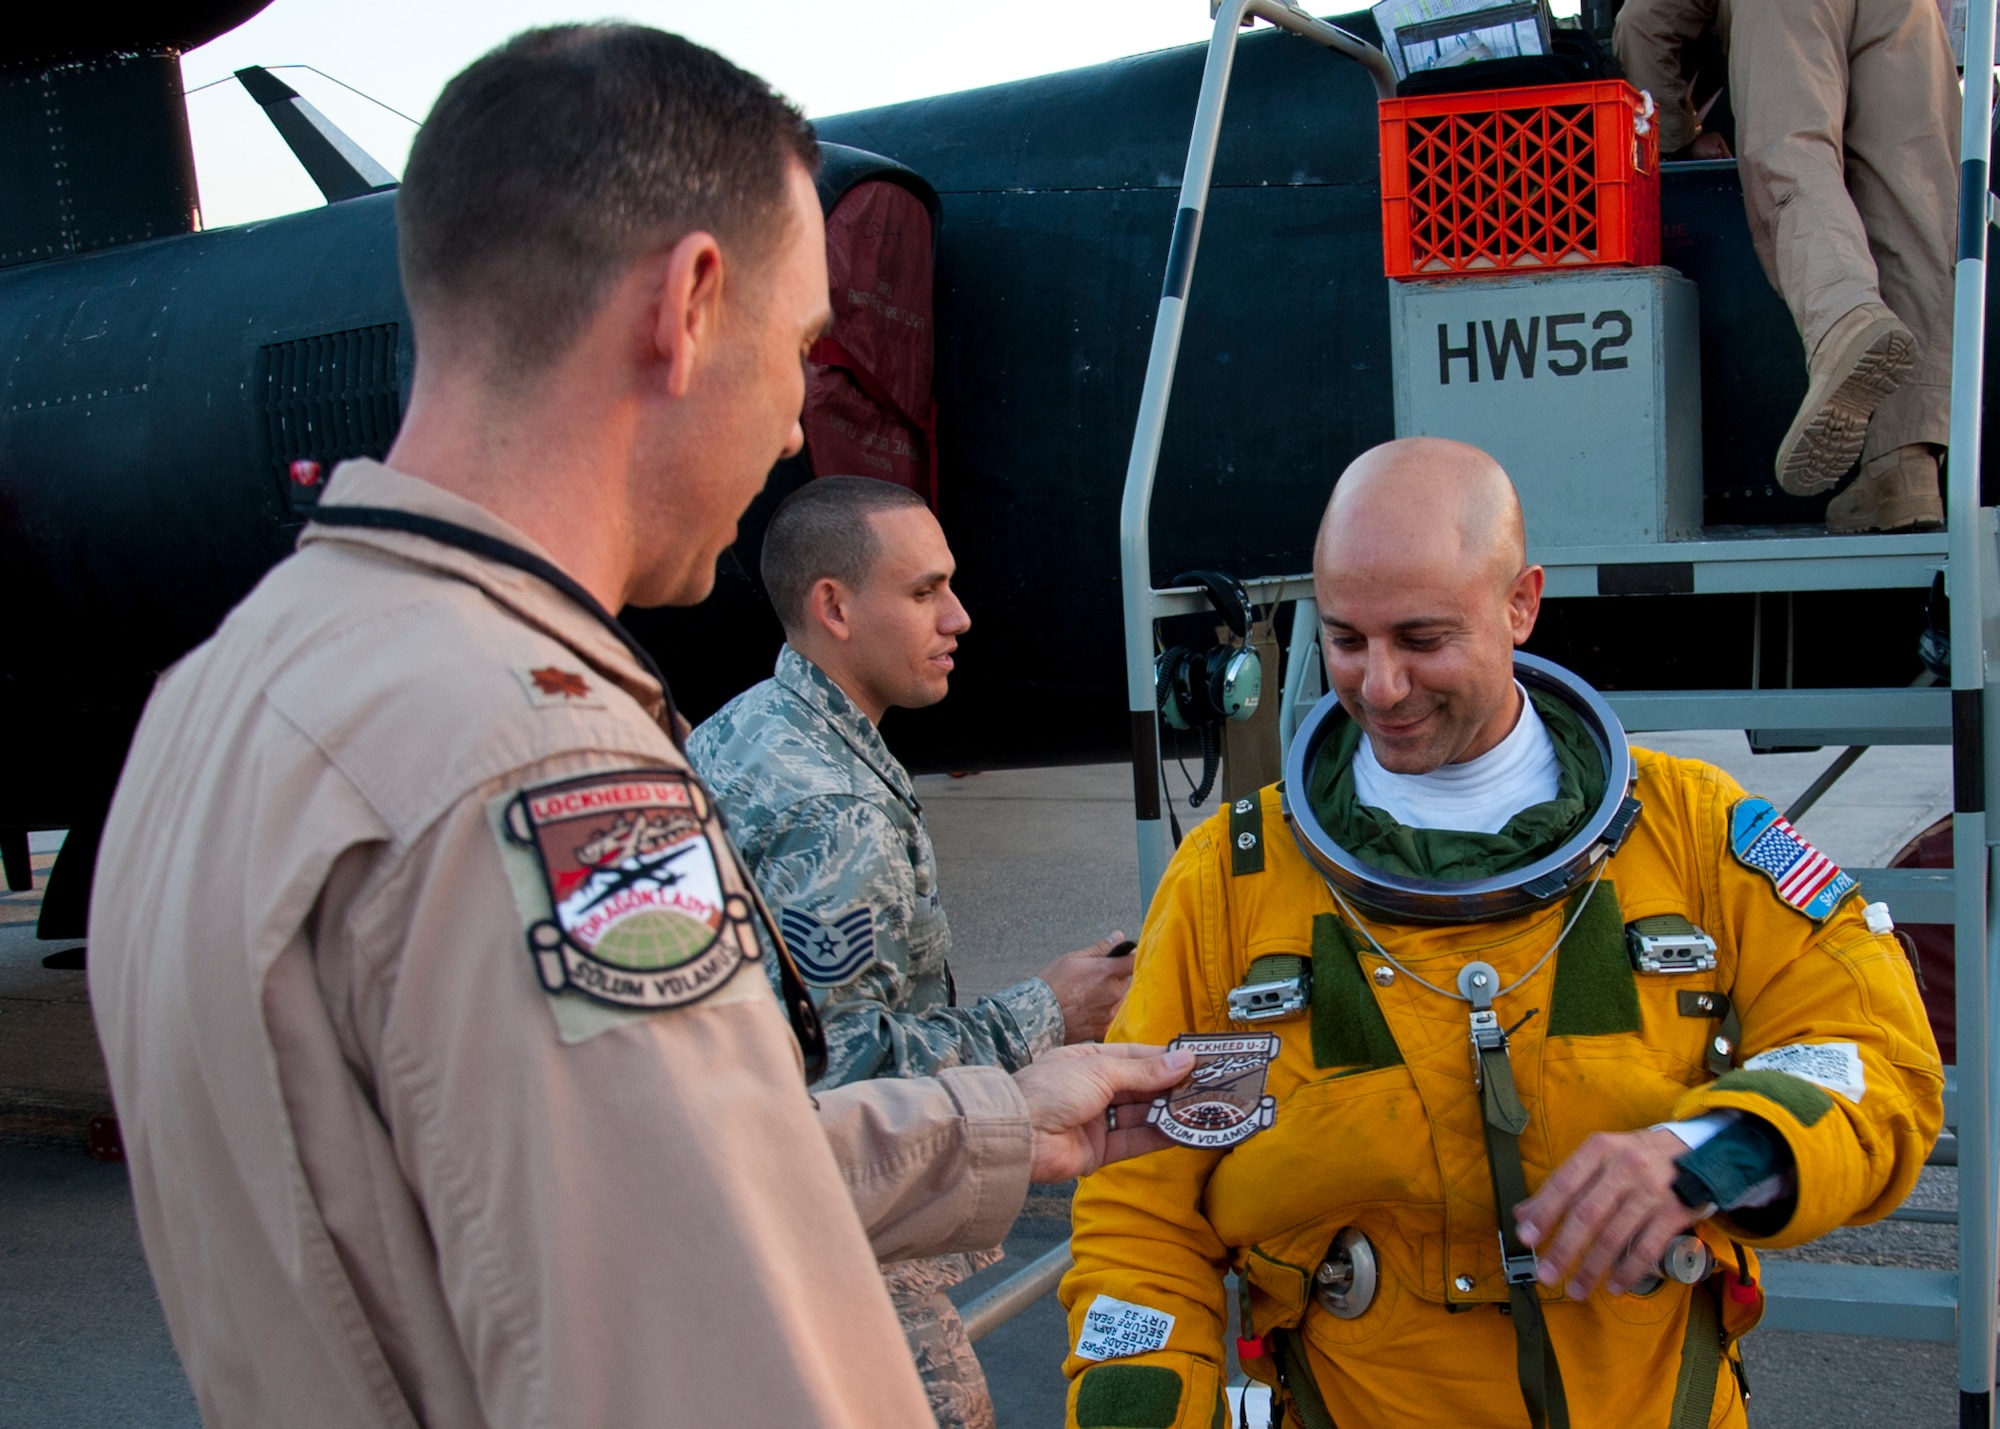 Air Force Maj. Ralph Shoukry, a pilot and tactics and employment lead assigned to the 99th Expeditionary Reconnaissance Squadron, is presented a patch after completing more than 1,000 combat flying hours at an undisclosed location in Southwest Asia, March 6, 2014. (U.S. Air Force photo by Staff Sgt. Michael Means/Released)